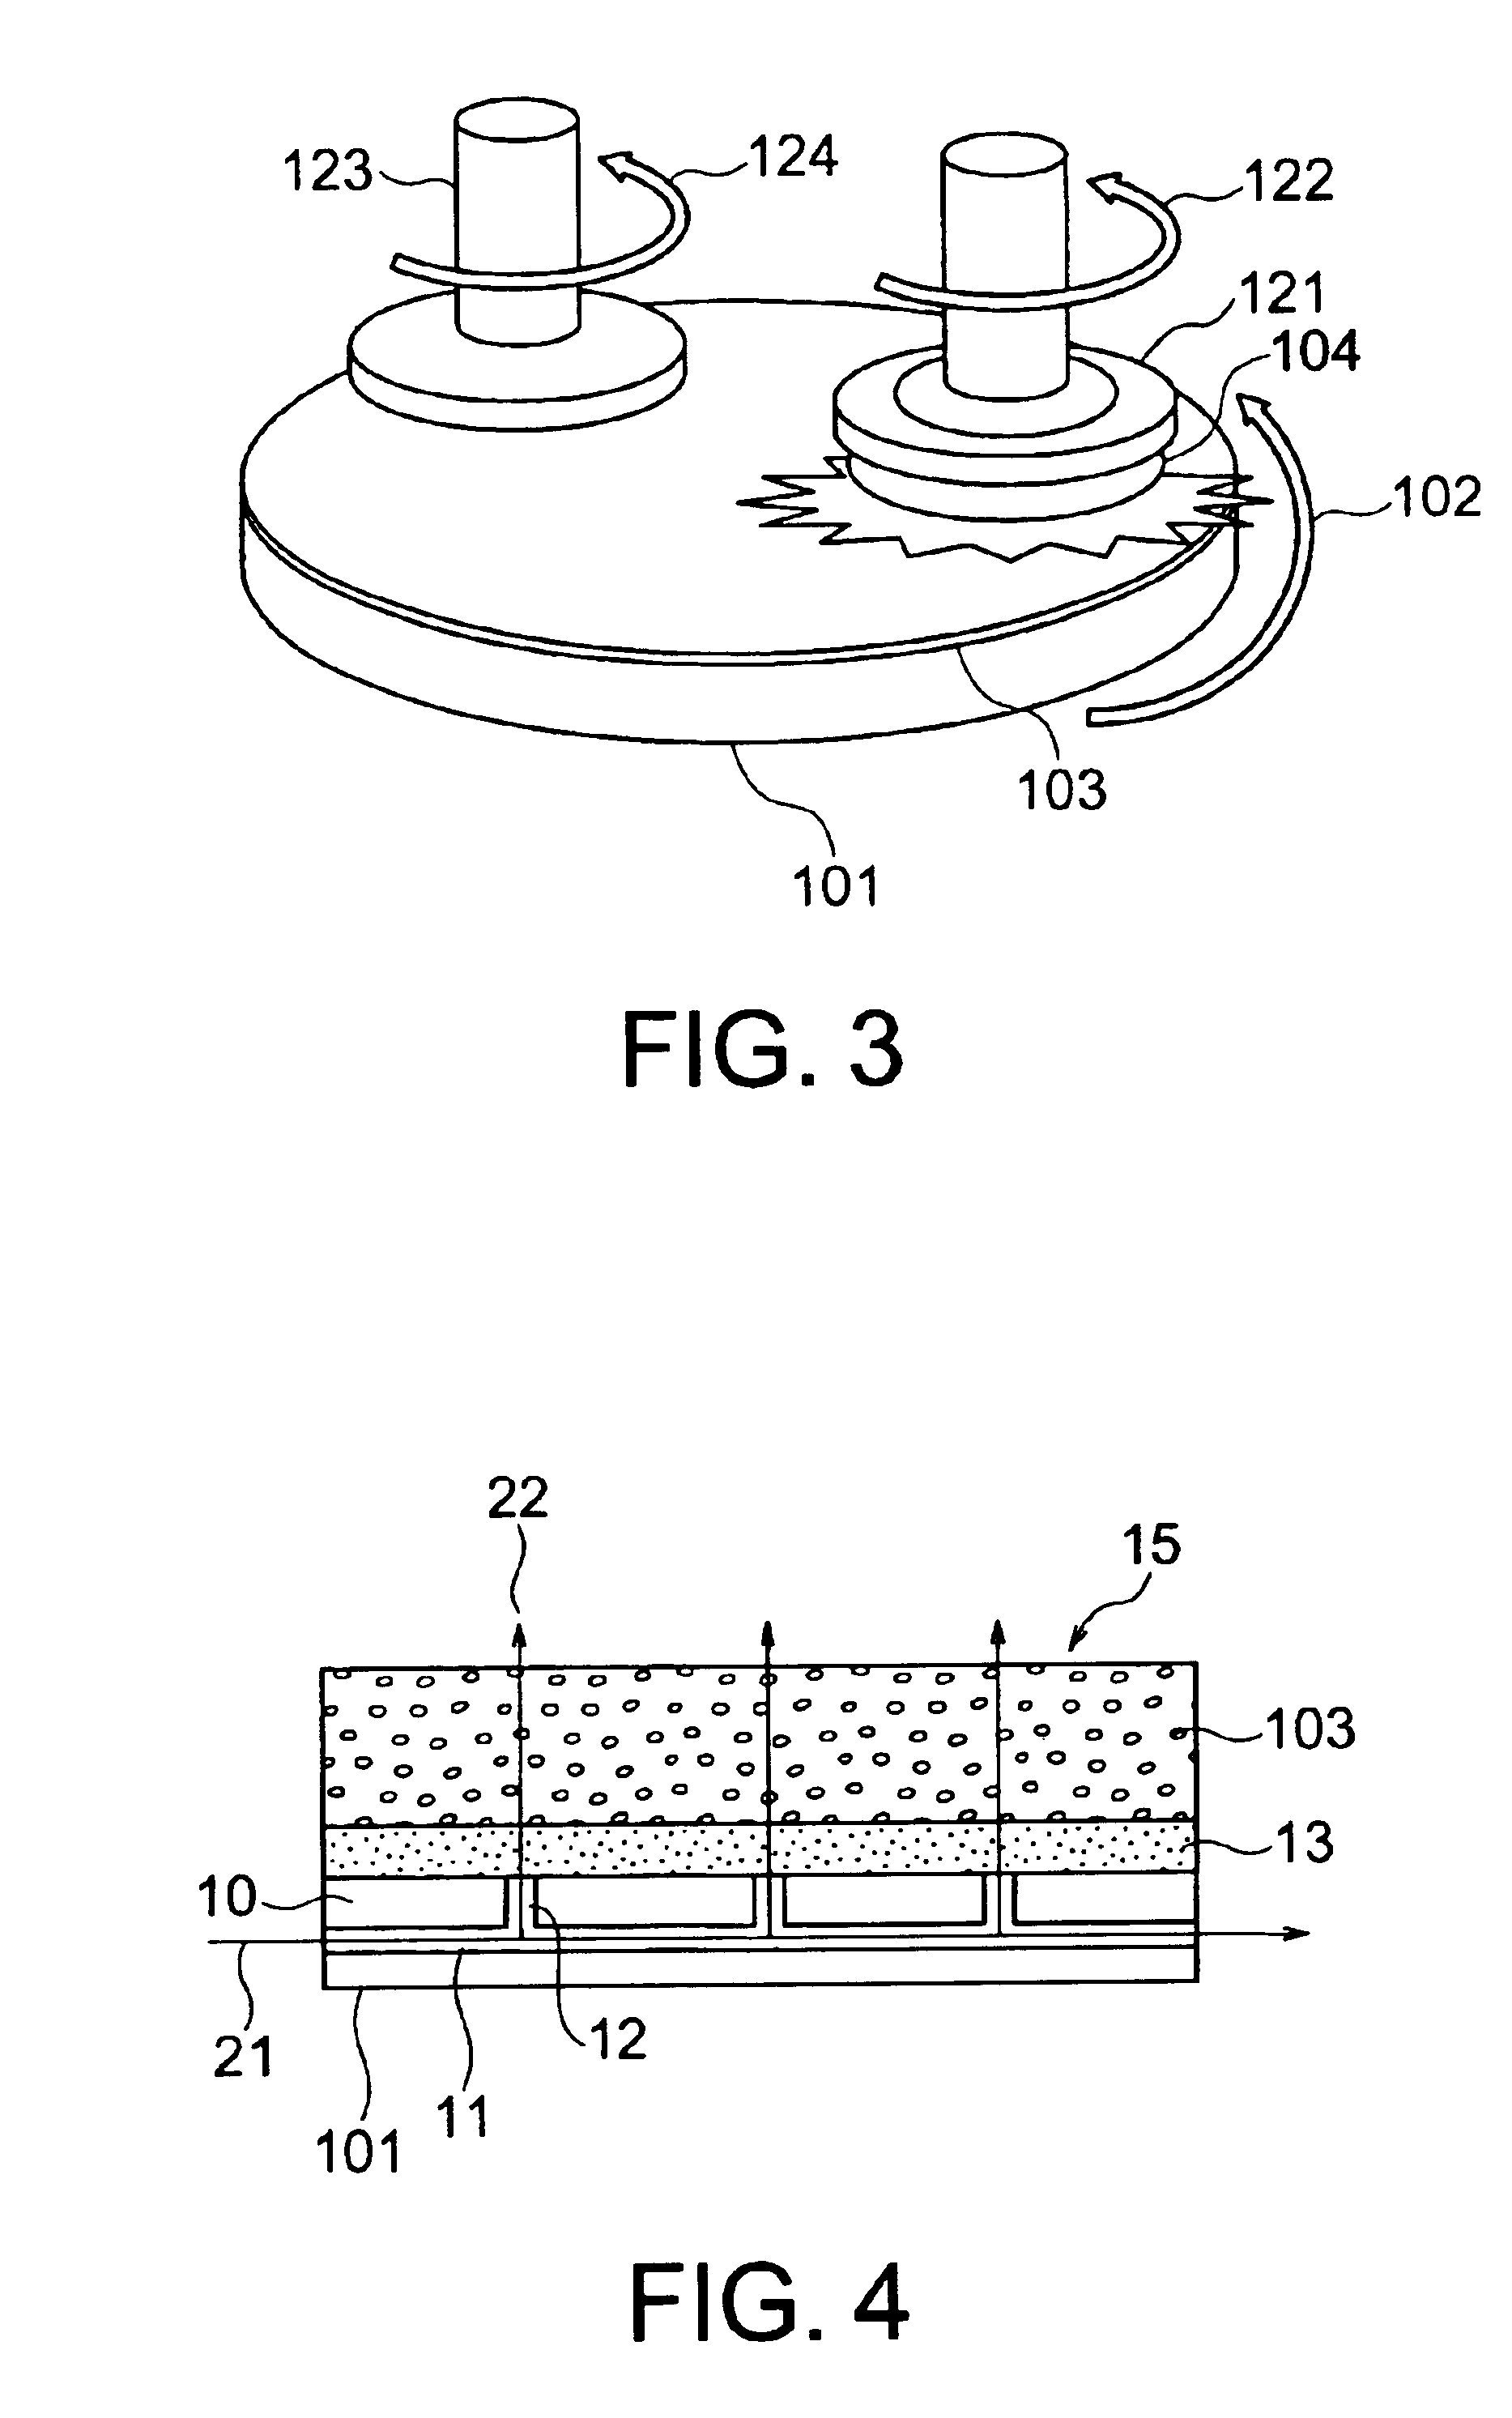 Semiconductor device fabrication method and apparatus